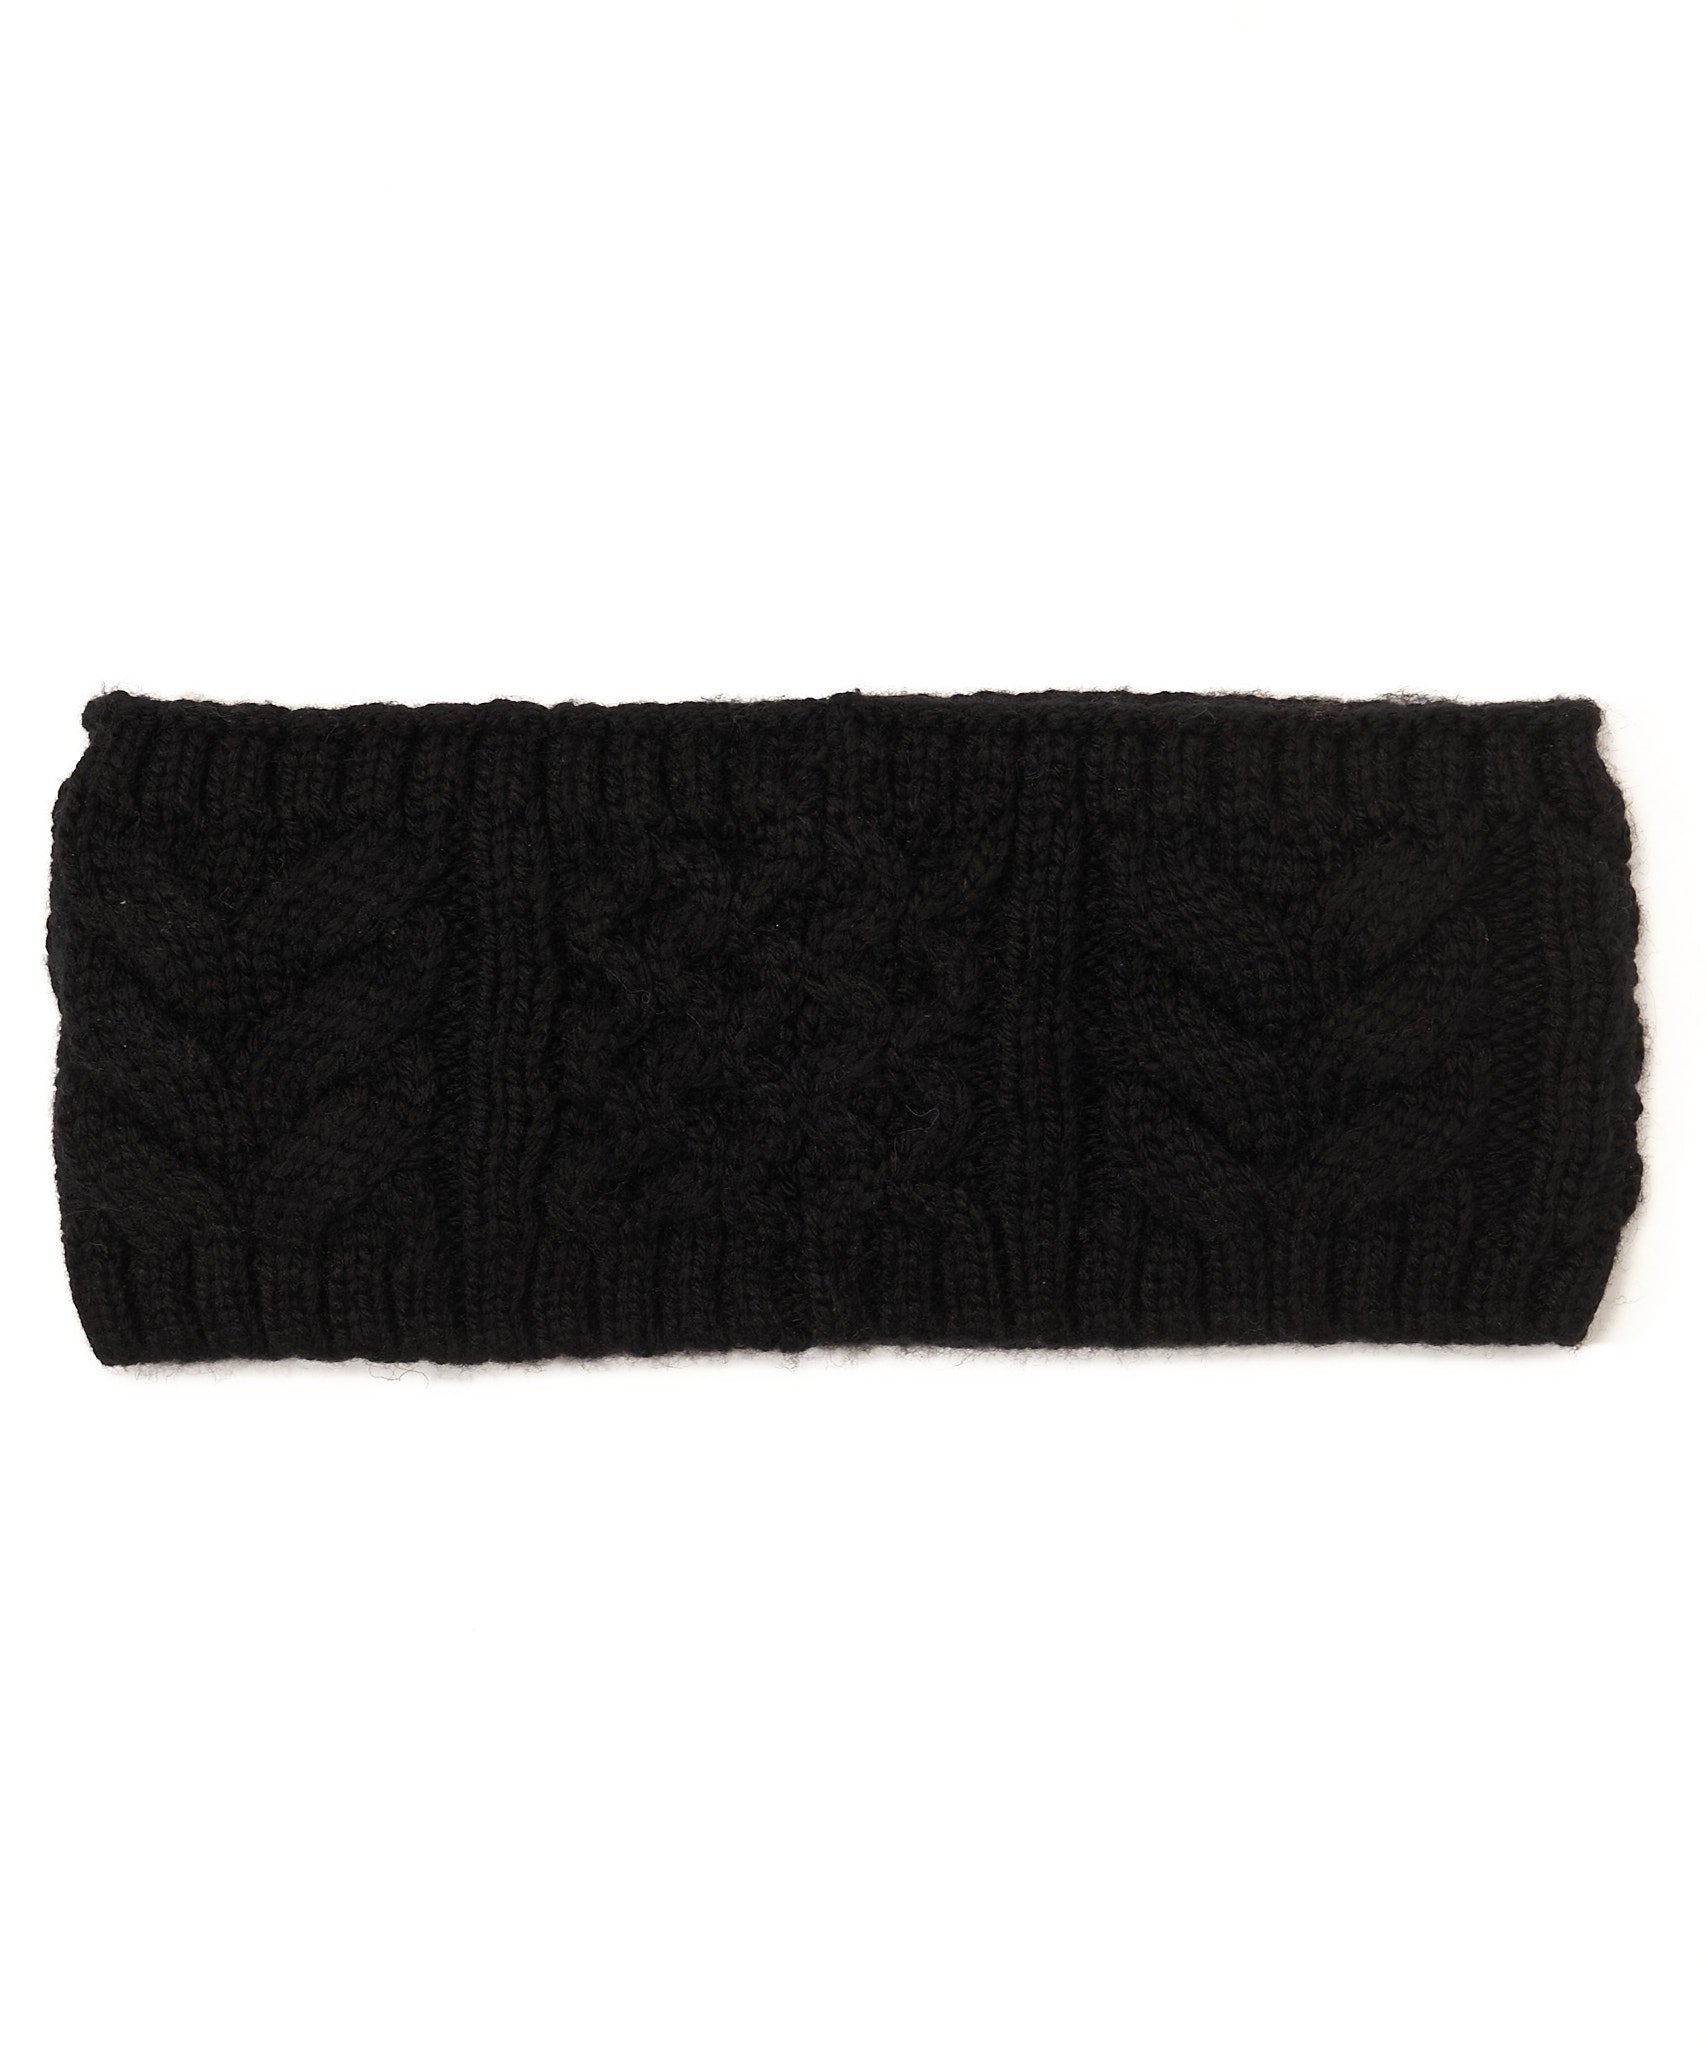 Recycled Wishbone Cable Headband in color Black